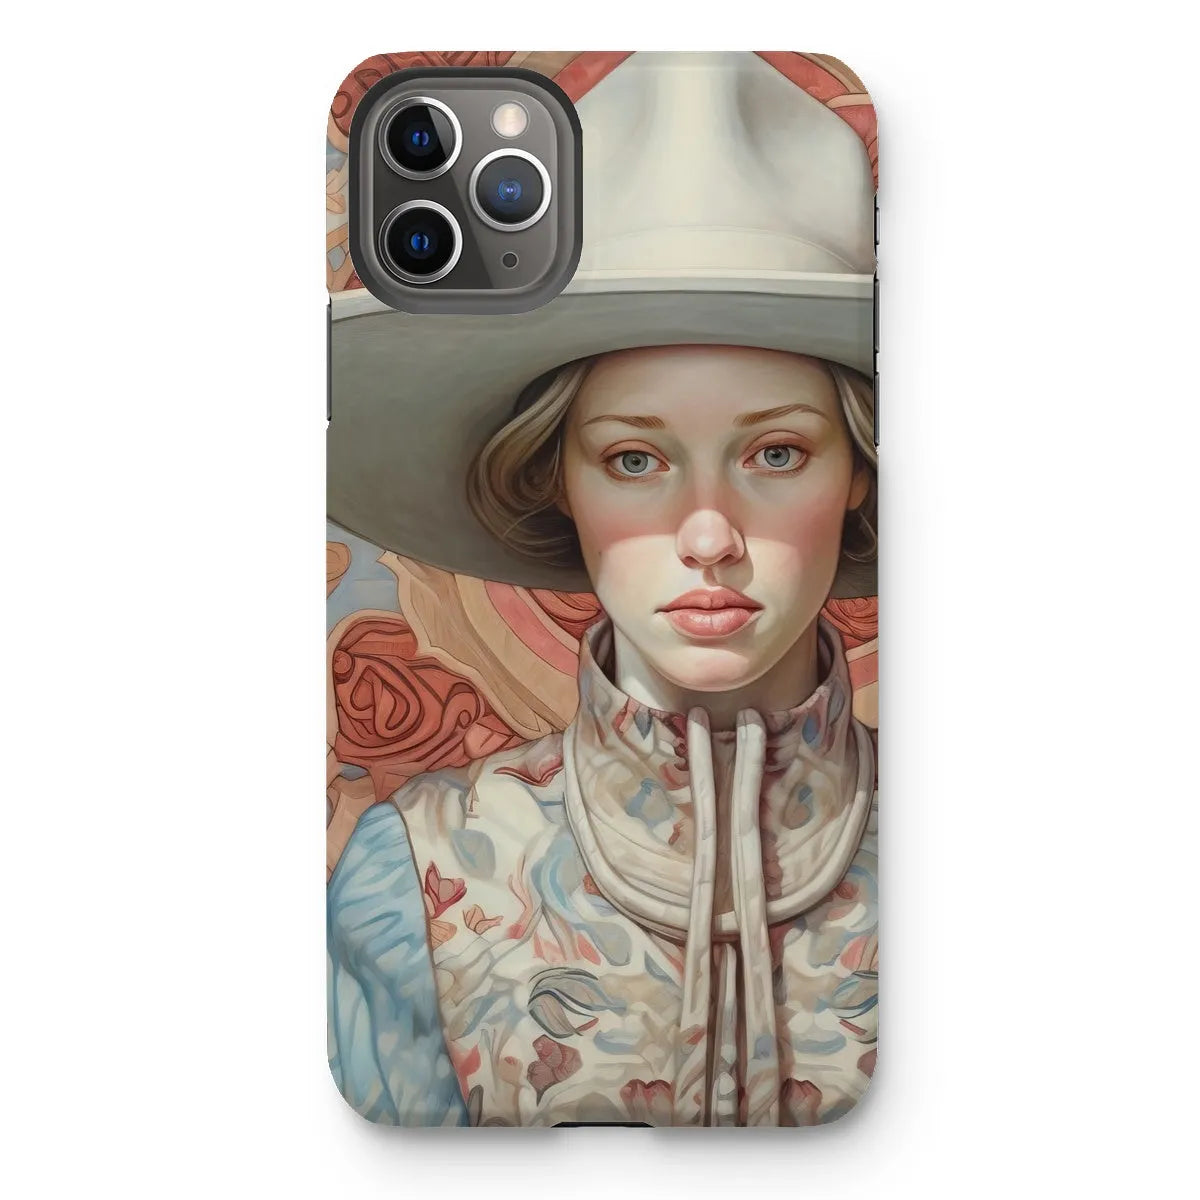 Lottie The Lesbian Cowgirl - Sapphic Art Phone Case - Iphone 11 Pro Max / Matte - Mobile Phone Cases - Aesthetic Art